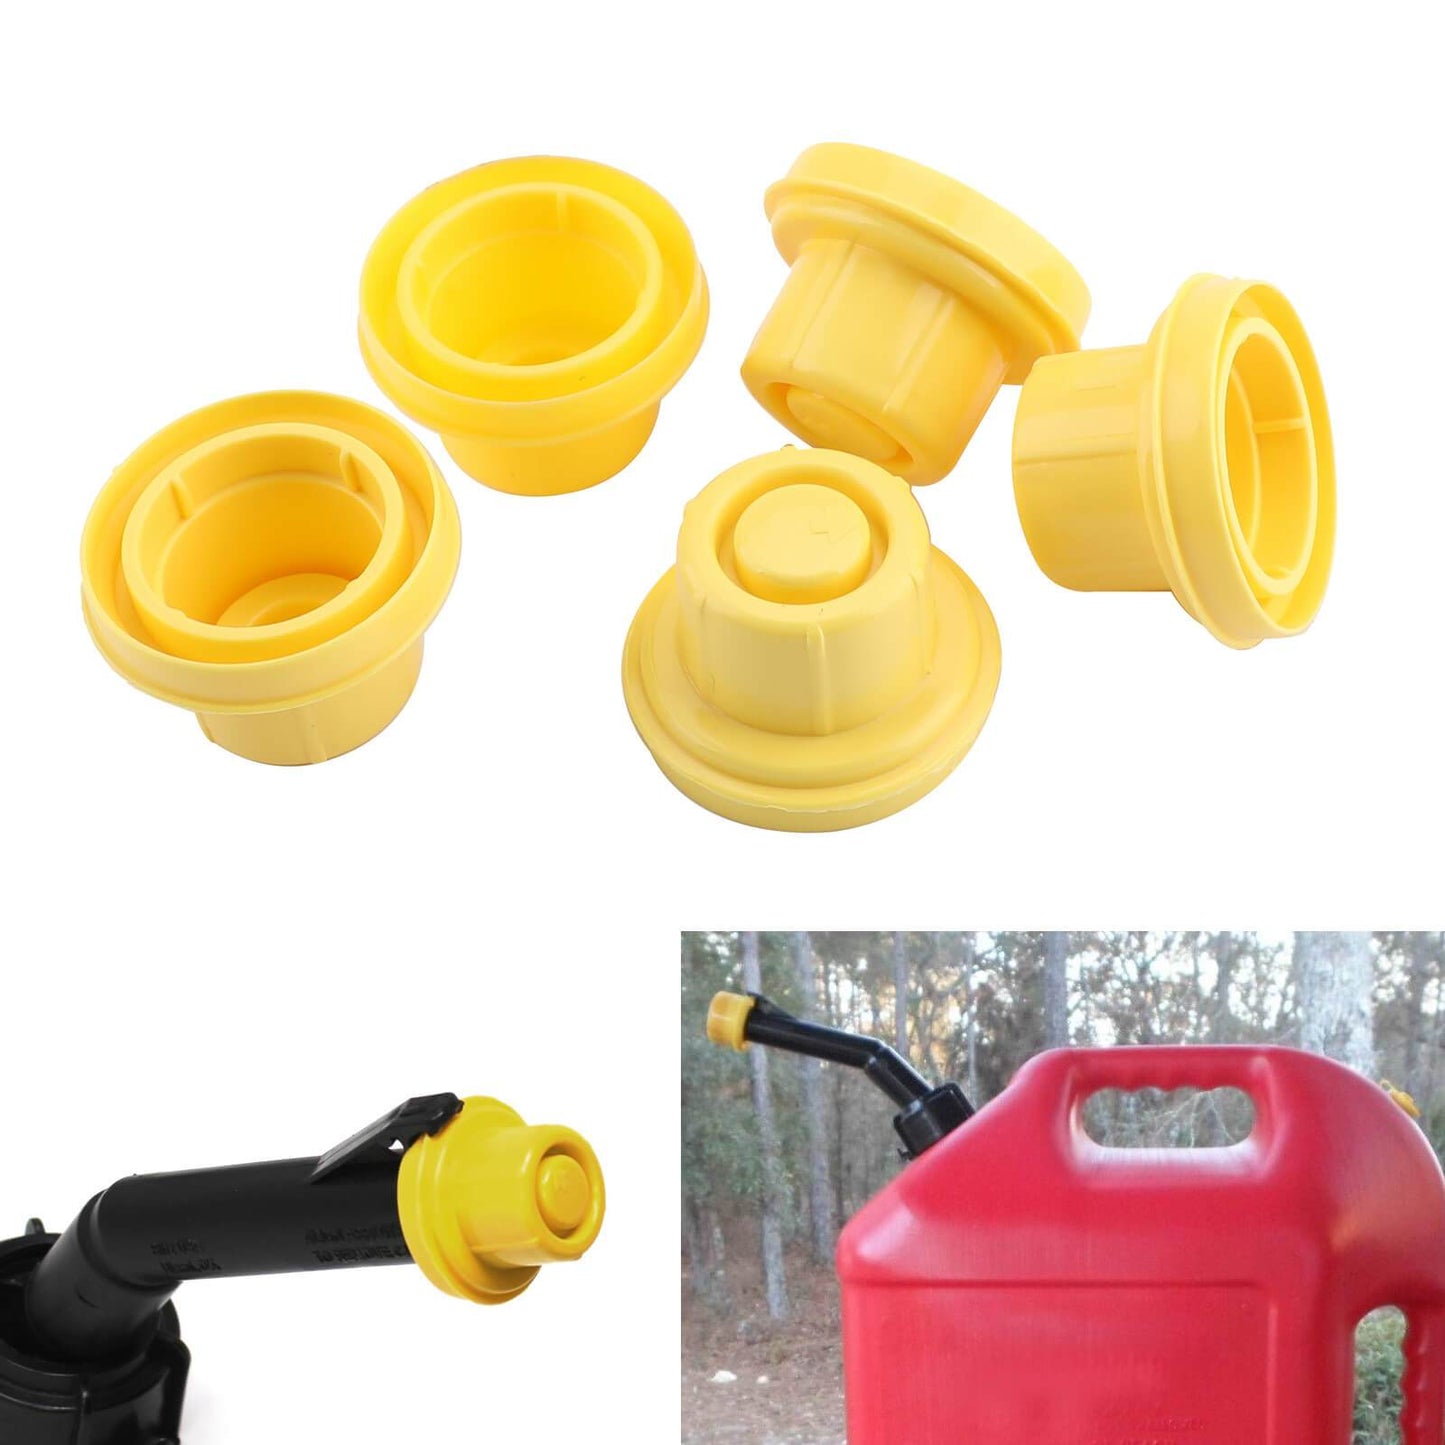 5x Replacement YELLOW SPOUT CAP Top For BLITZ Fuel GAS CAN 900302 900092 900094